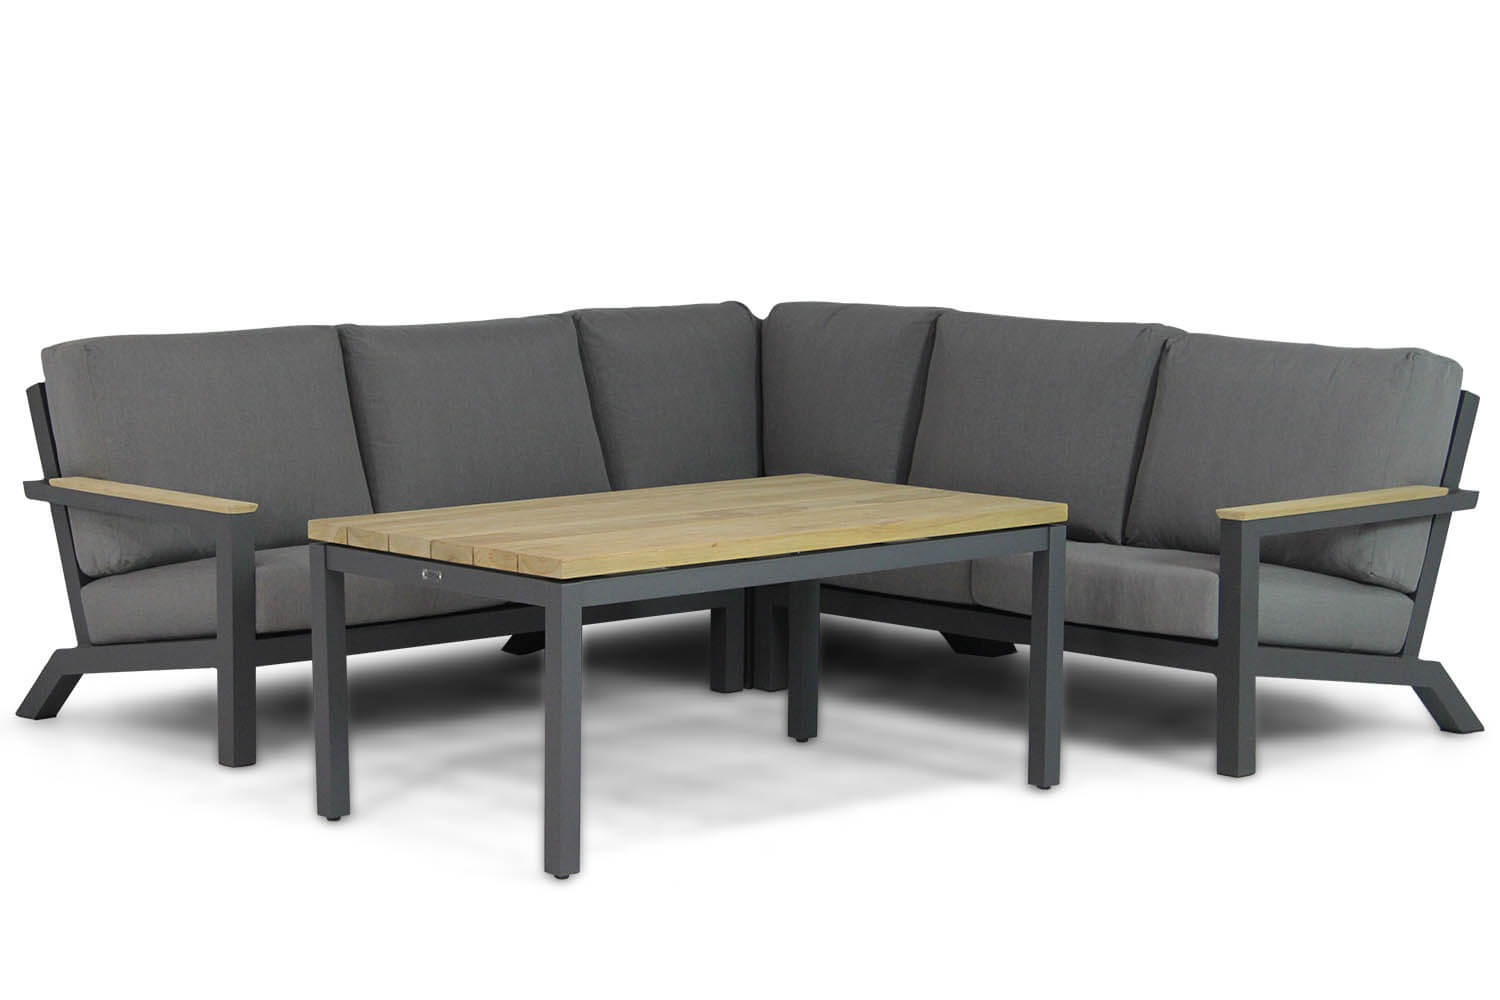 4 Seasons Outdoor Capitol/Lifestyle Riviera 140 cm dining loungeset 4-delig aanbieding